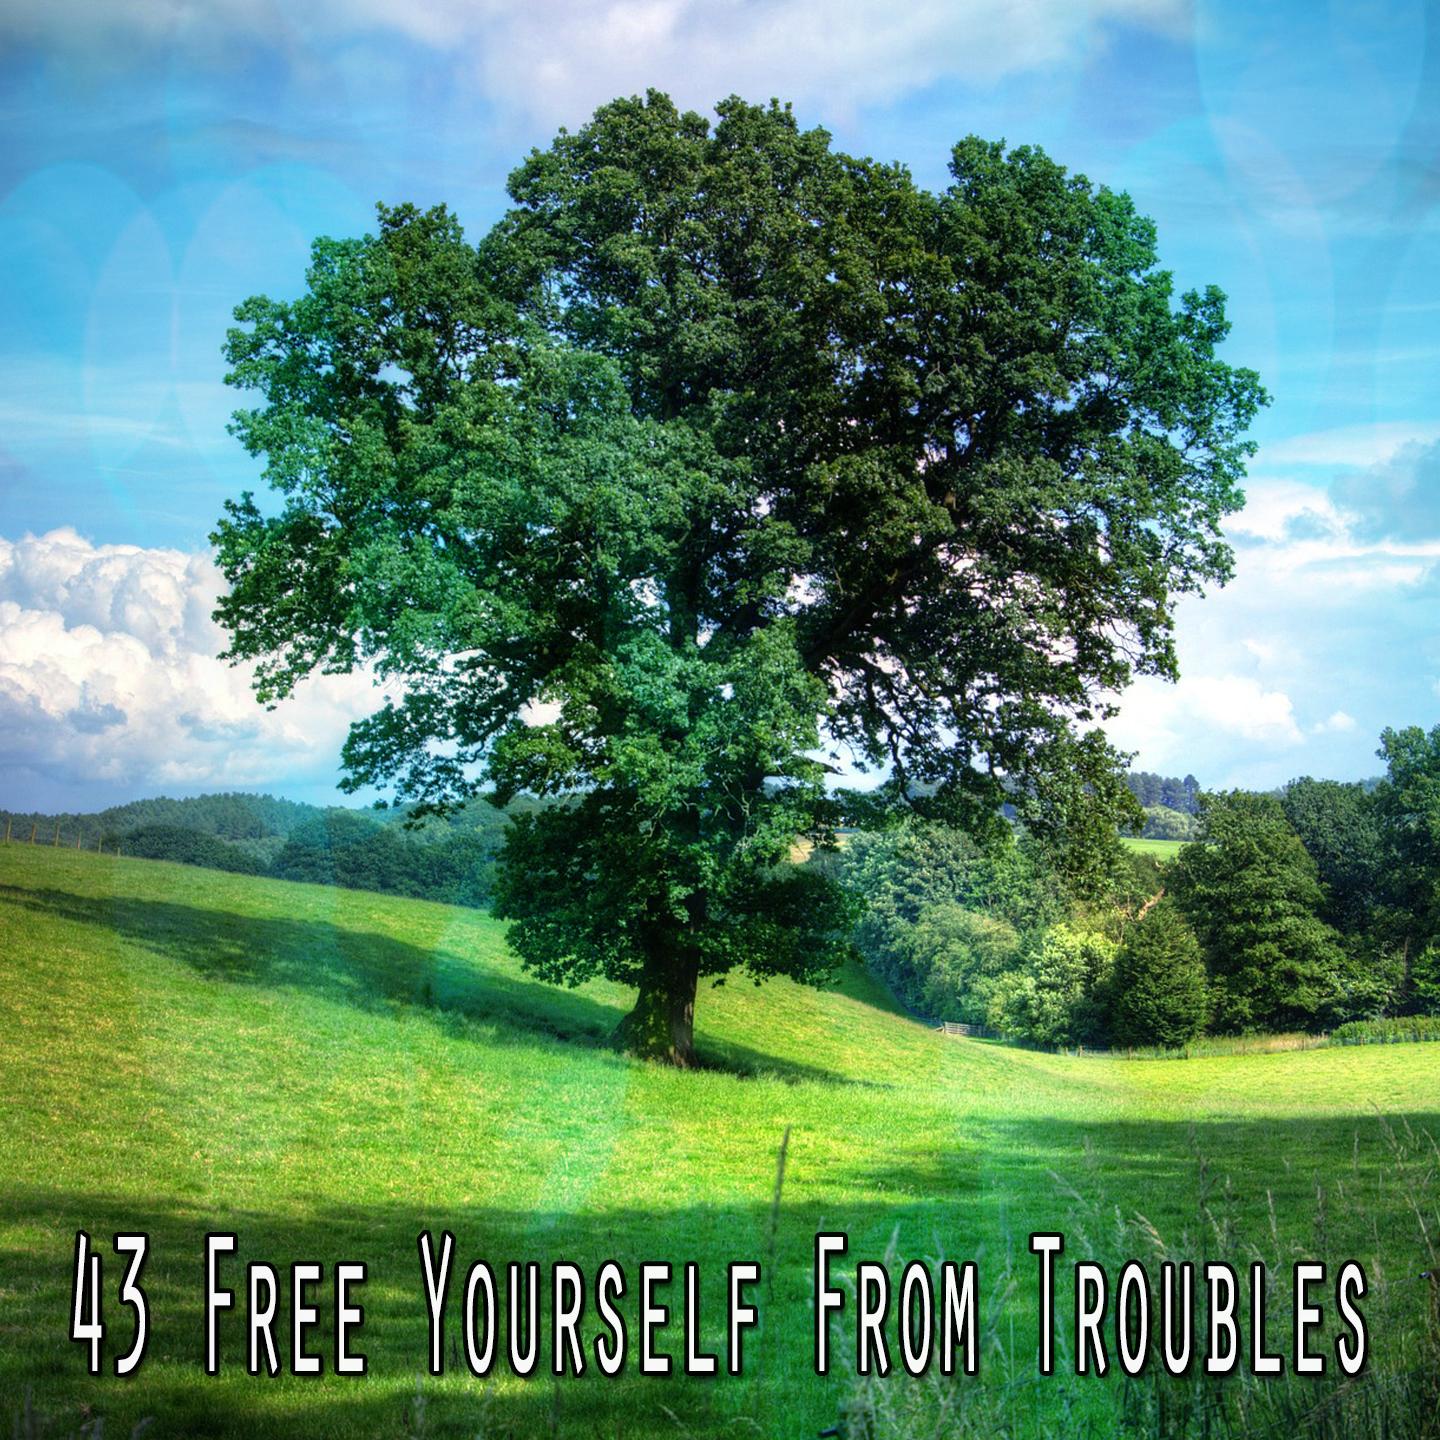 43 Free Yourself from Troubles